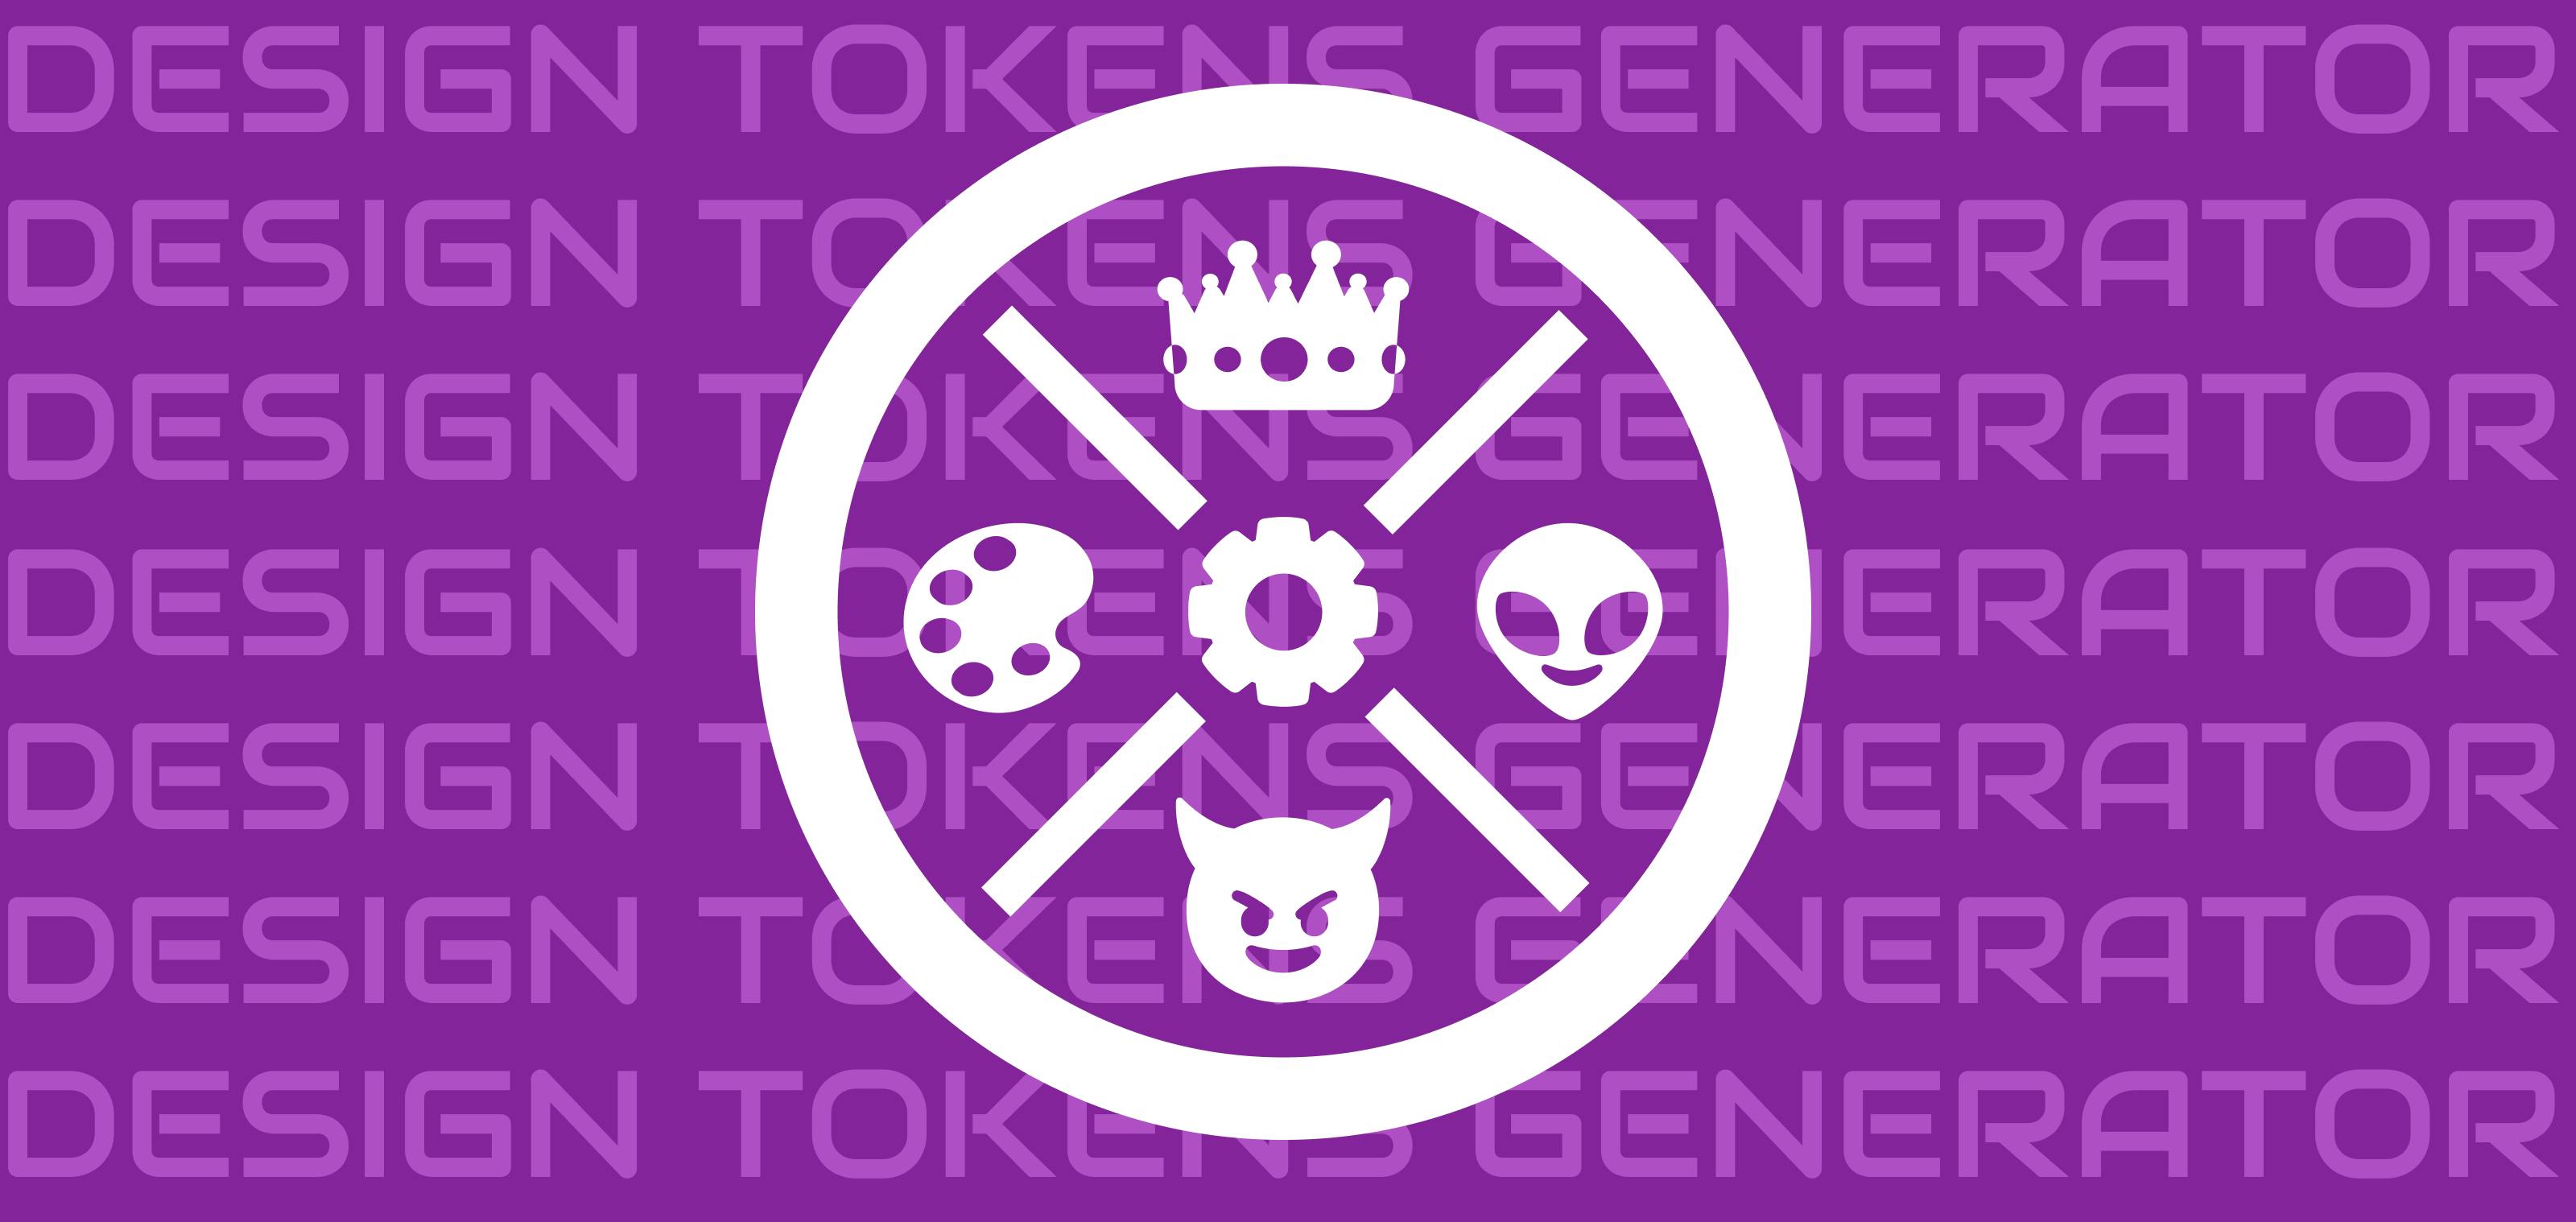 Hero image of Design Tokens Generator — app logo is placed on the surface with the wording pattern